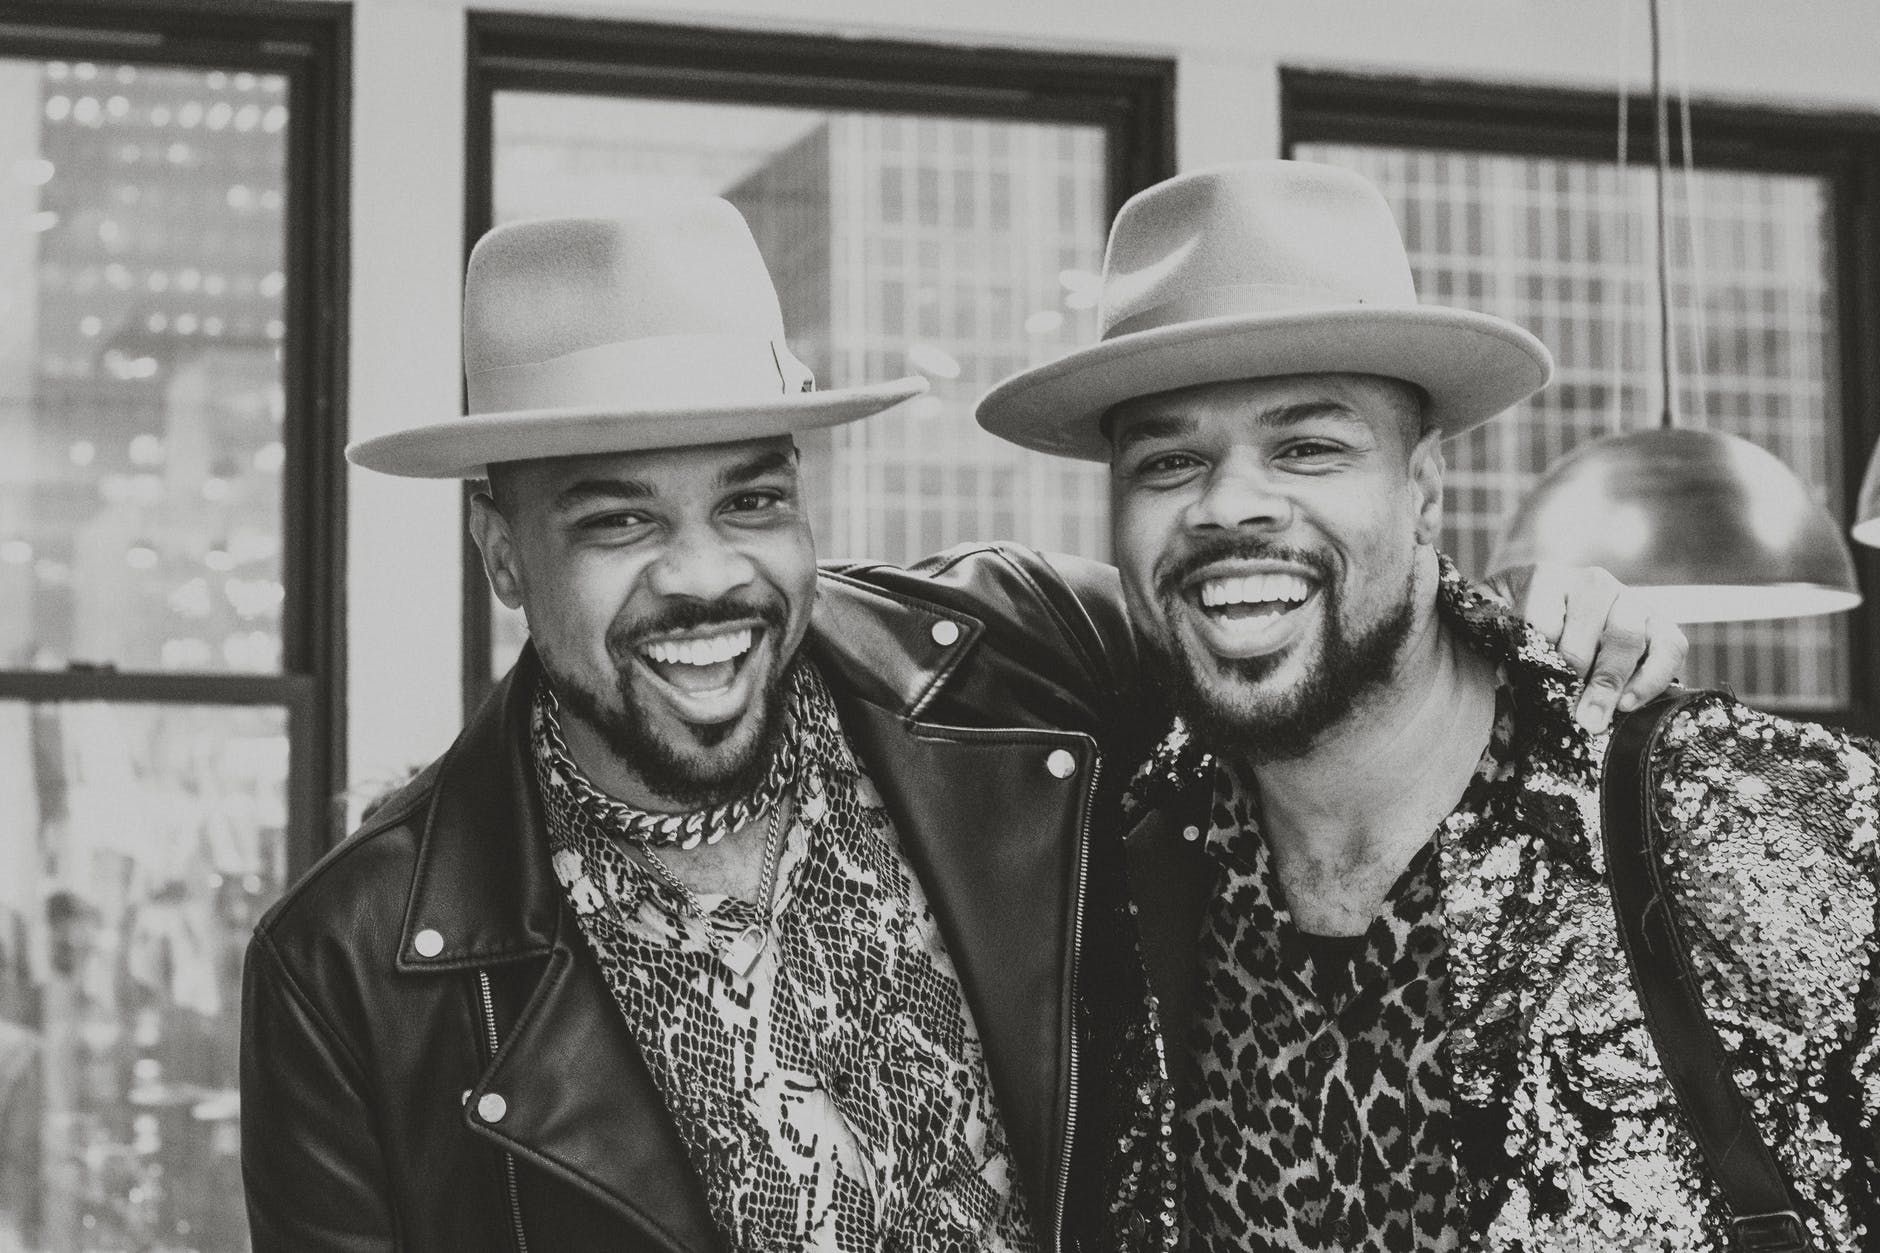 grayscale photo of male twins in same fedora hats standing together